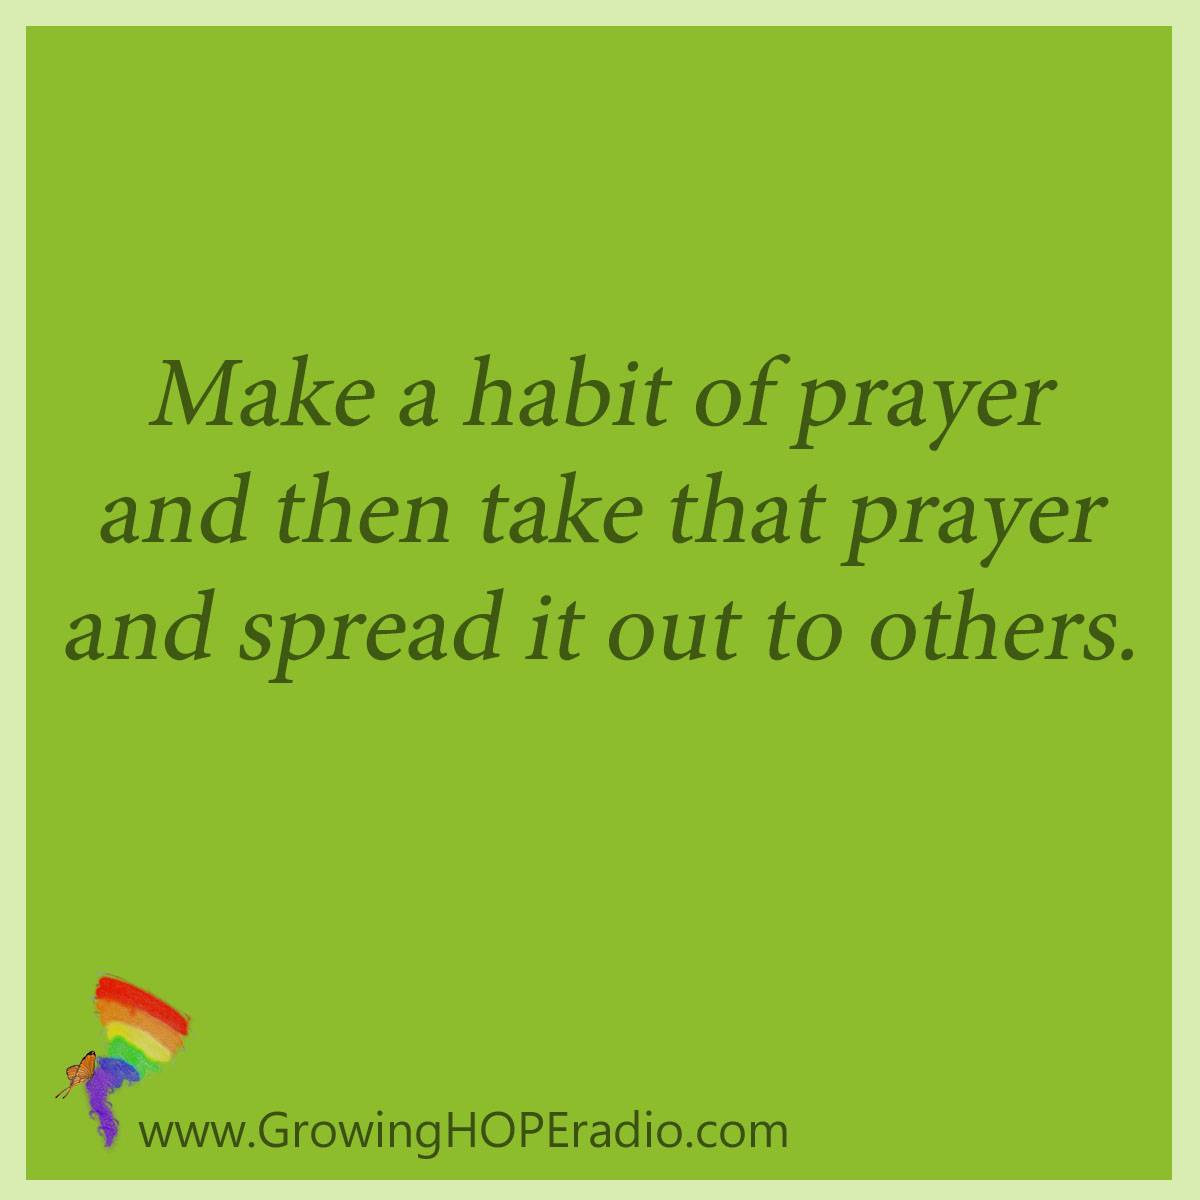 Growing HOPE daily - quote - habit of prayer